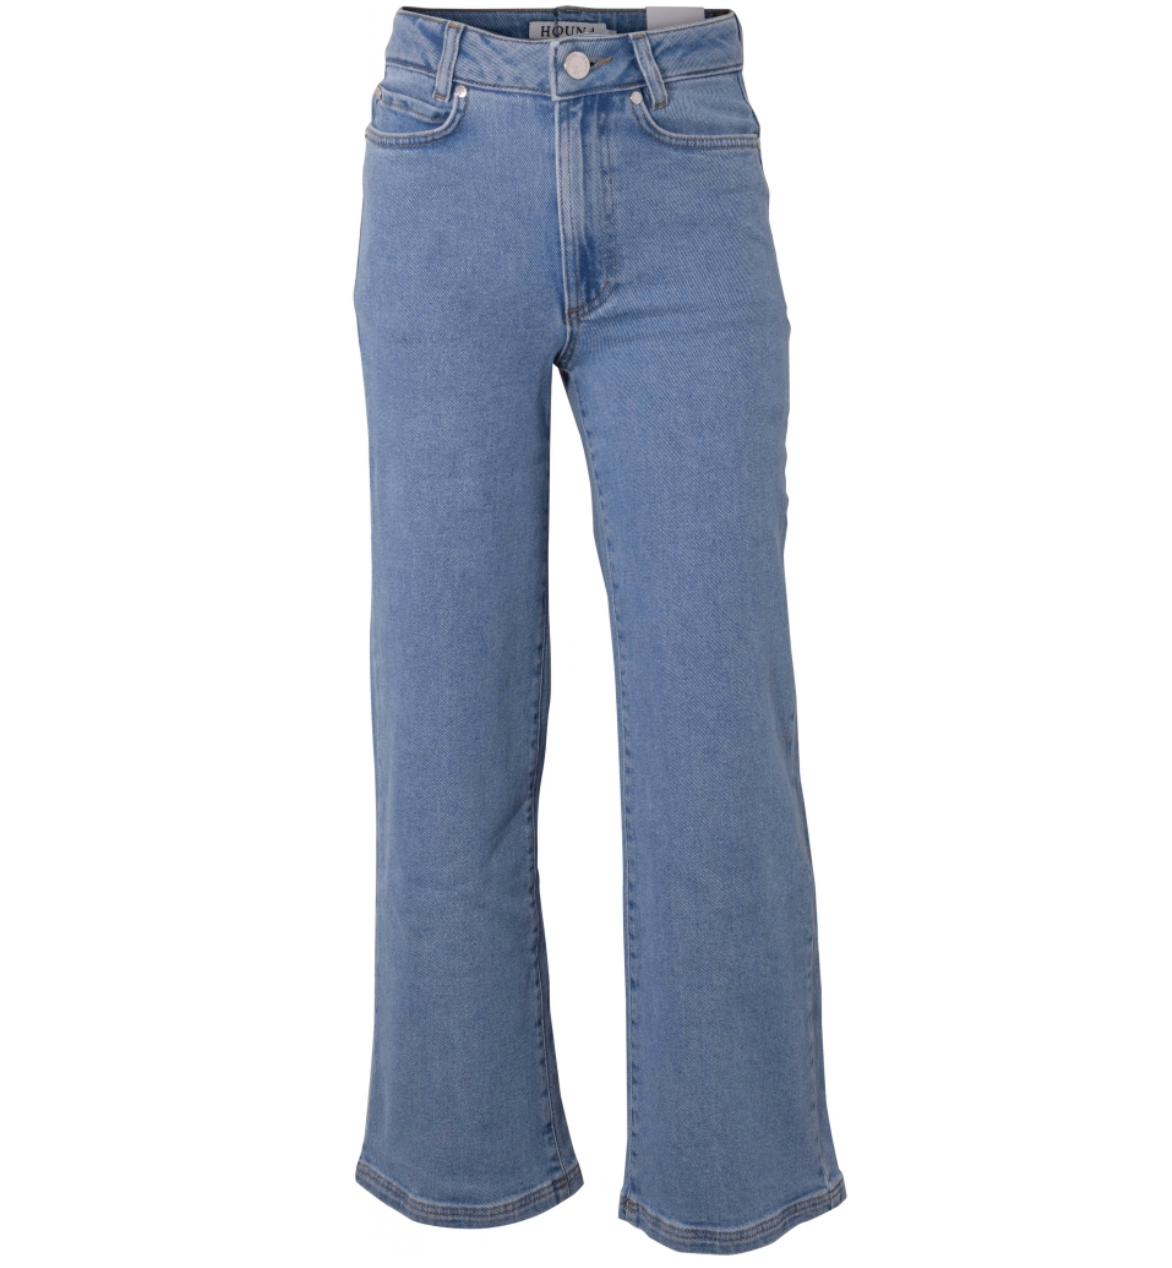 WIDE JEANS - LIGHT STONE WASH